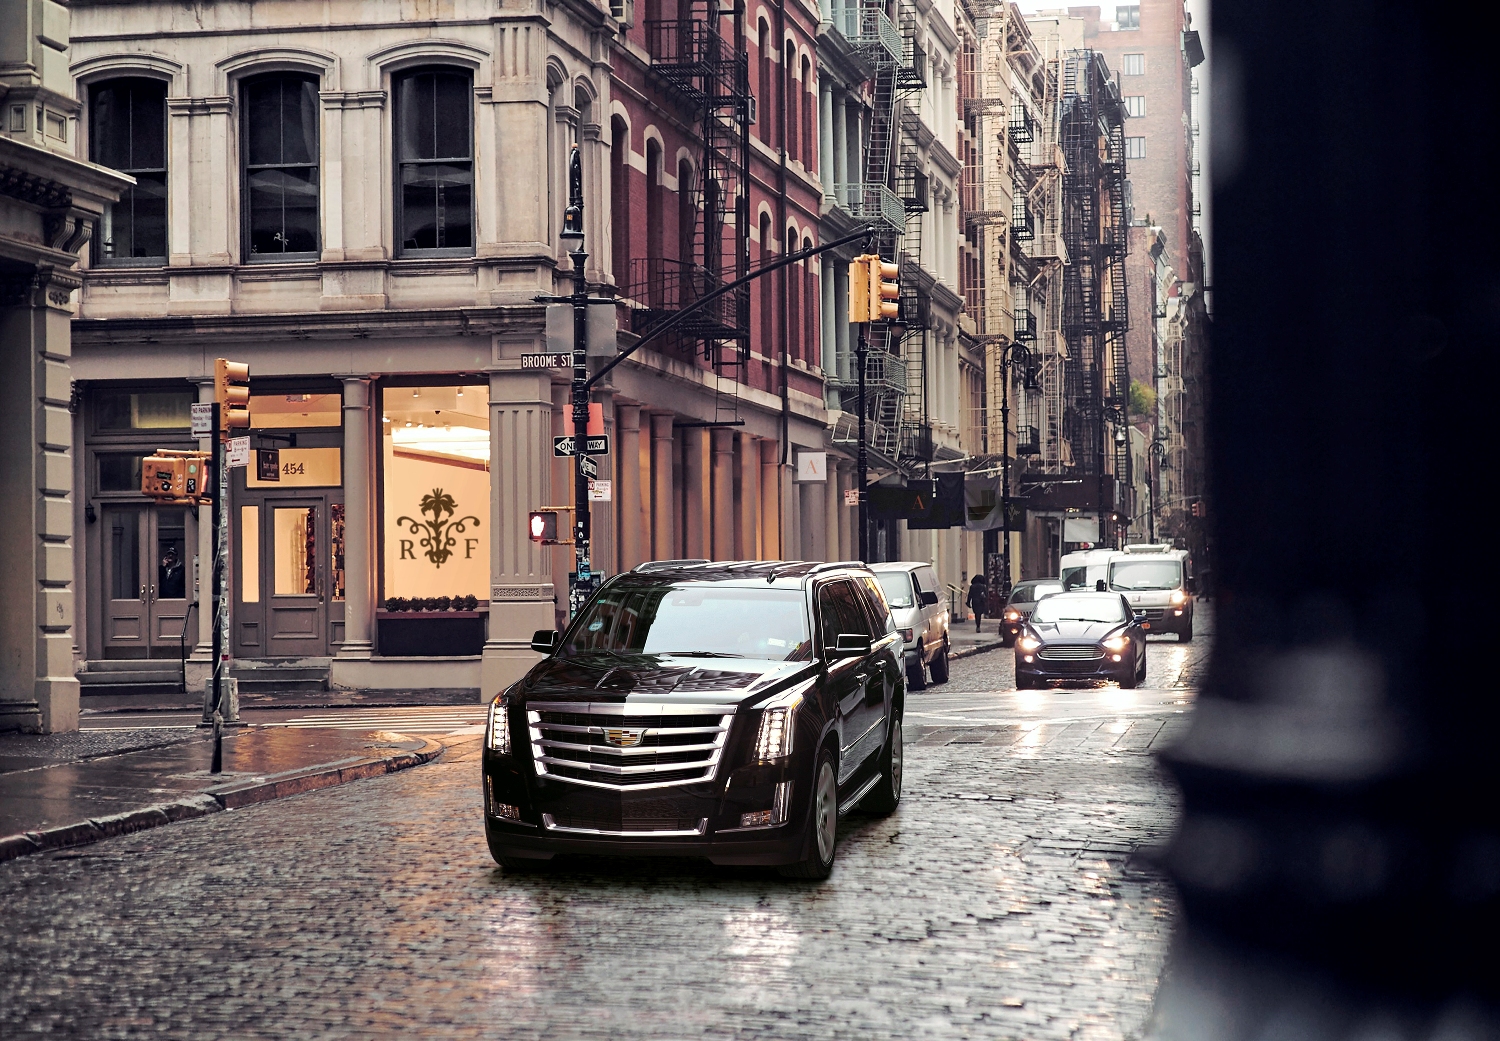 cadillac-offers-big-discounts-on-the-escalade-to-counteract-growing